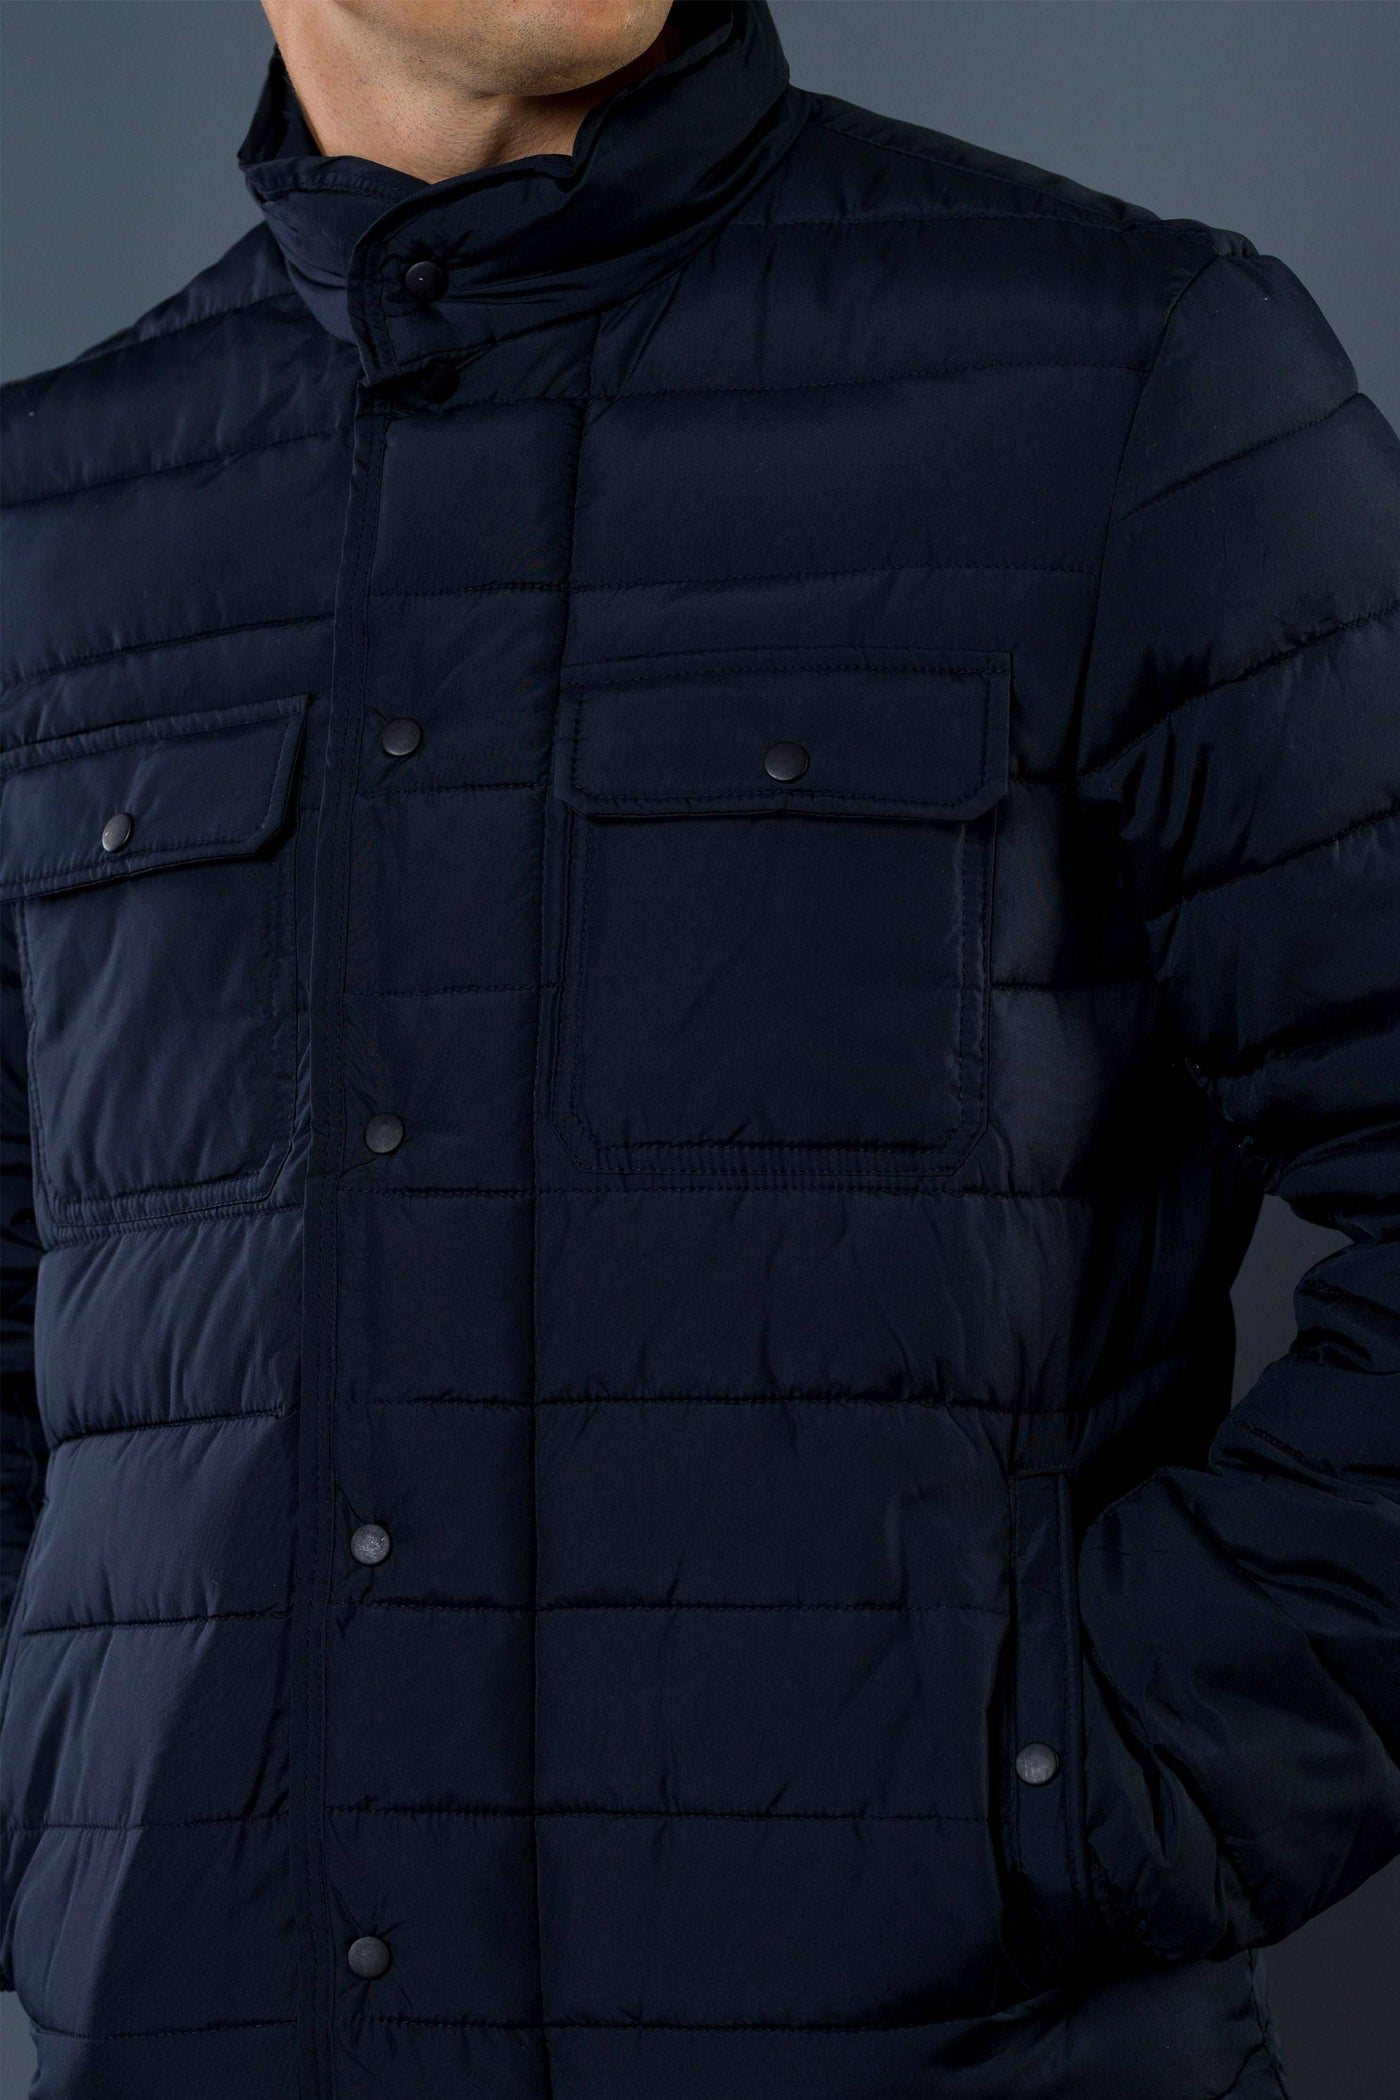 Front Double Pockets Winter Jacket